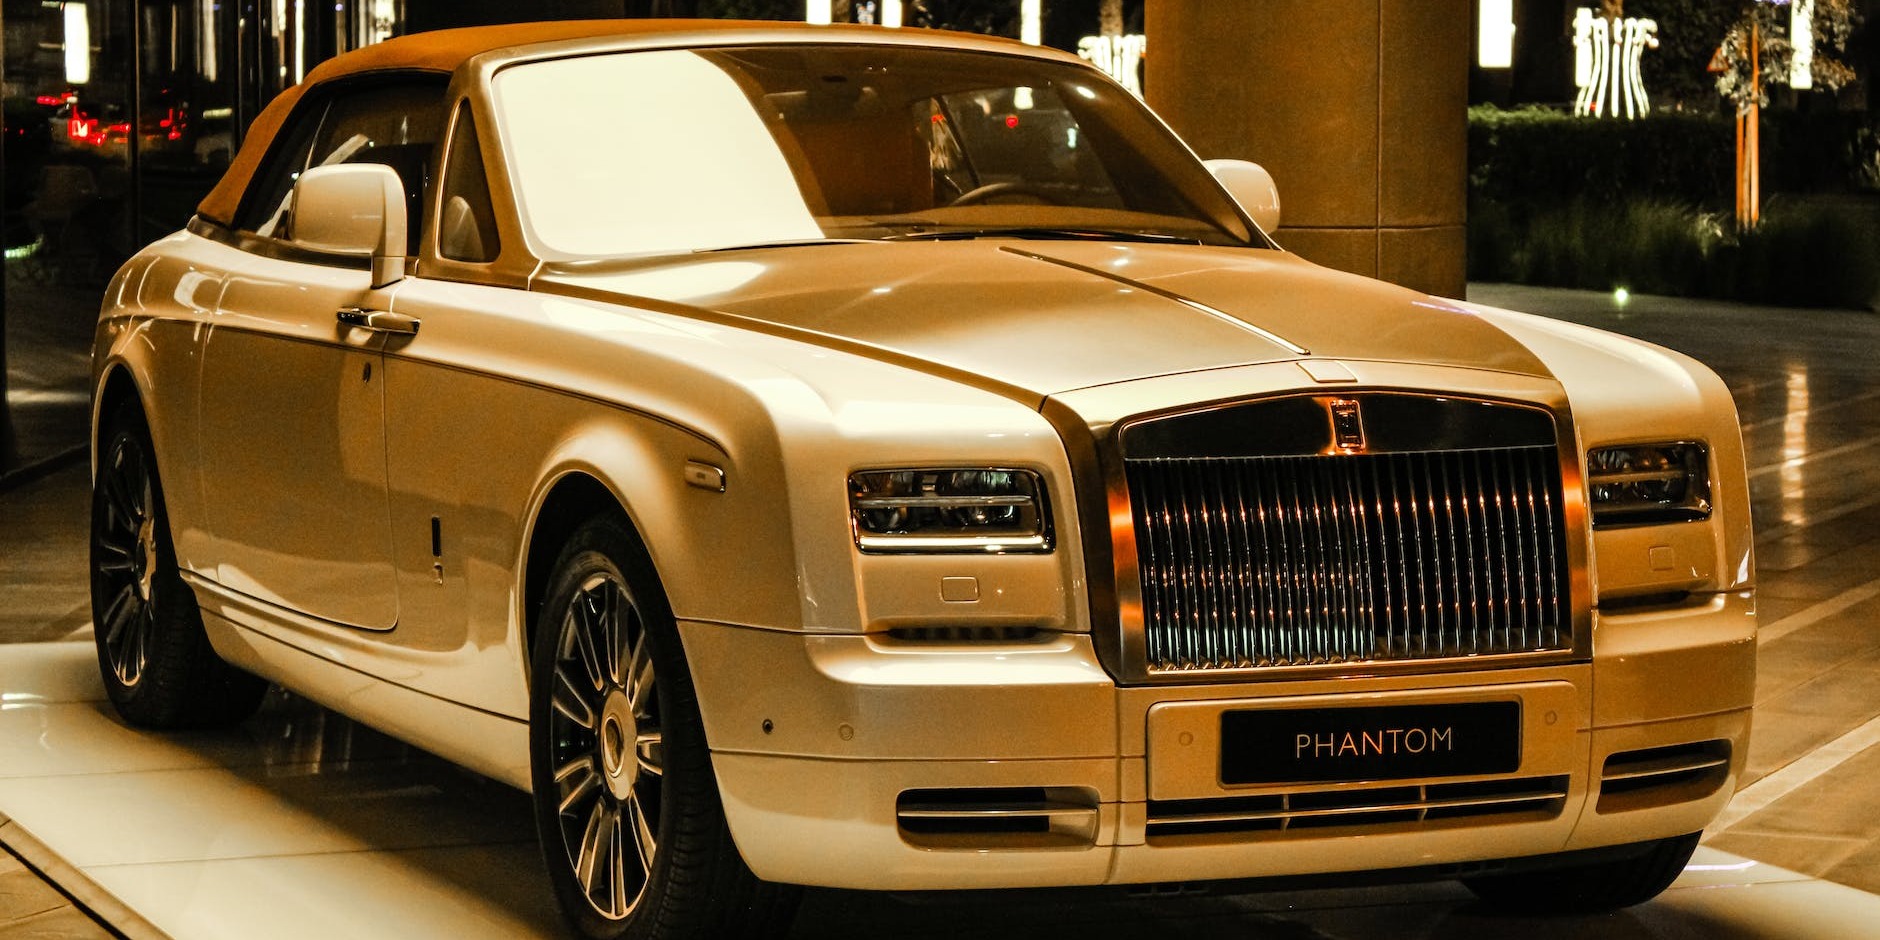 Hire the Rolls Royce Phantom for an Unforgettable Prom Night